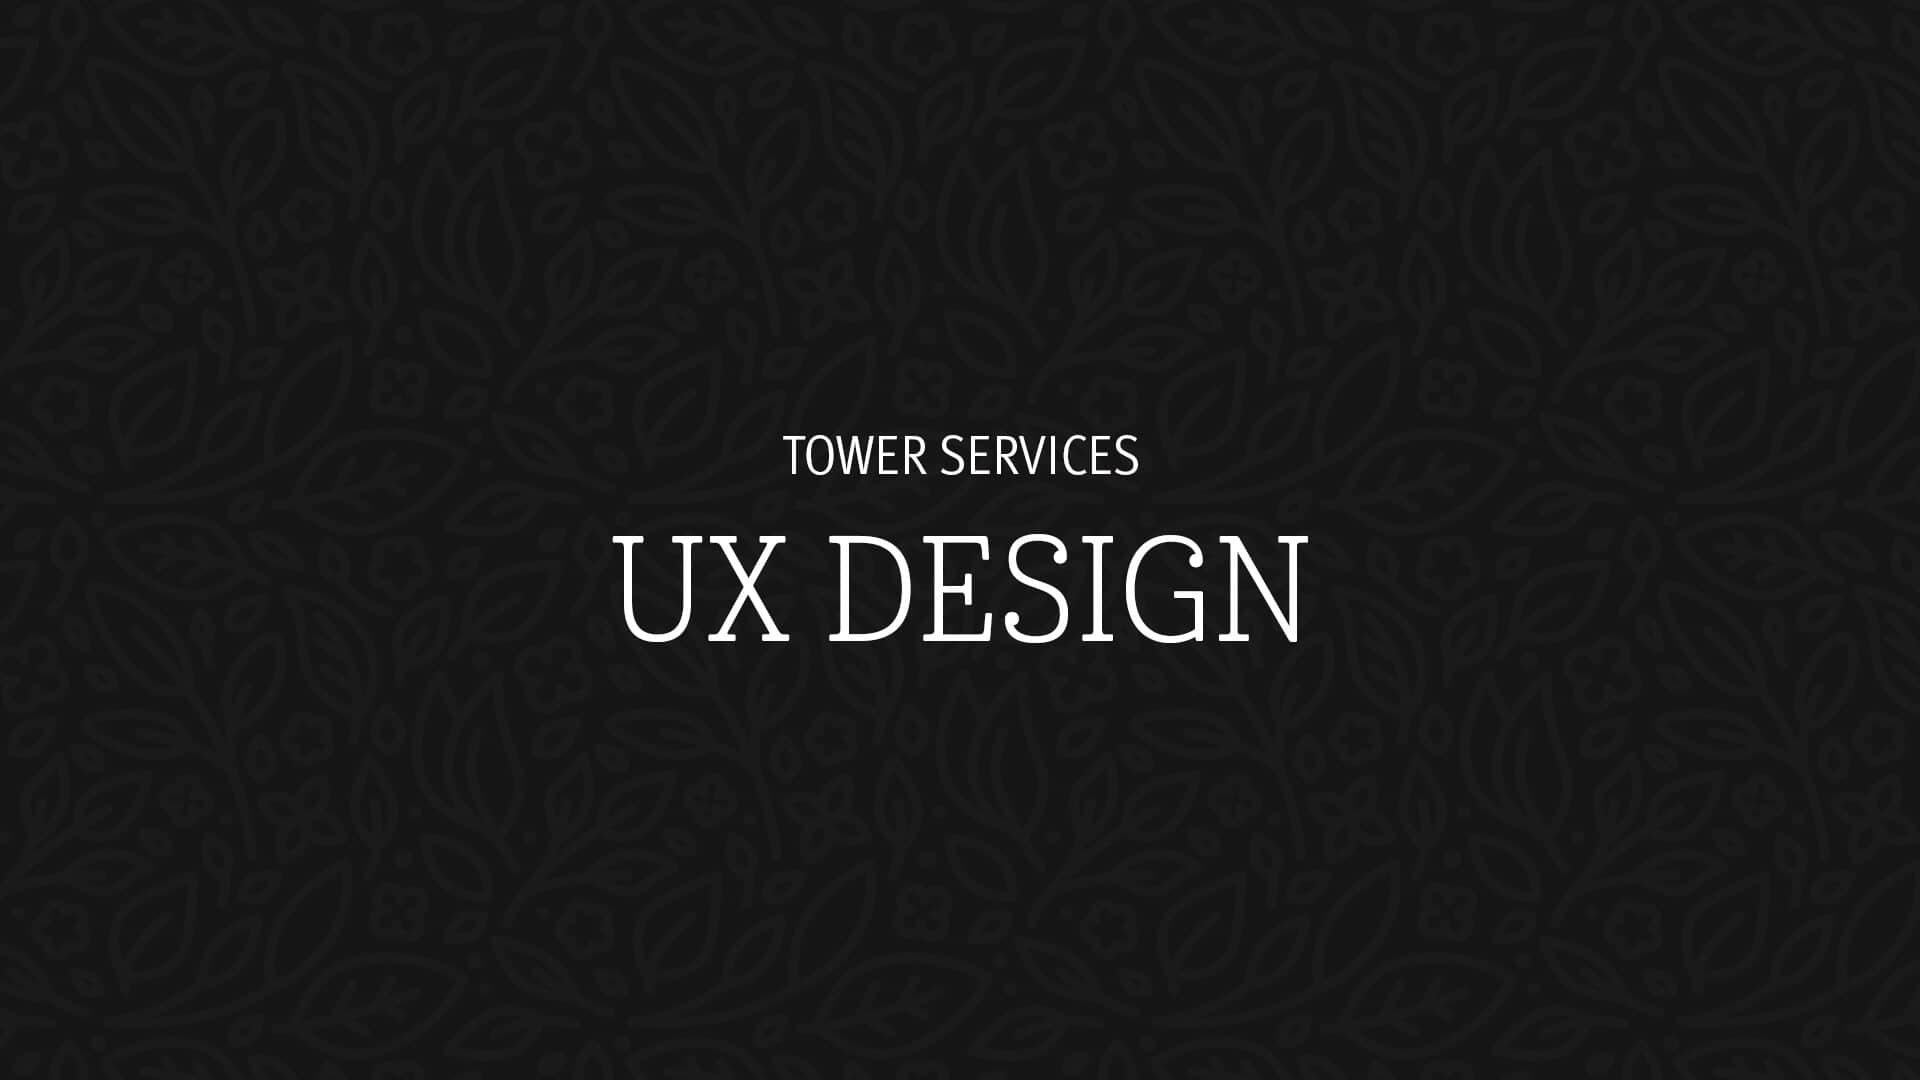 Tower MArketing UX design services